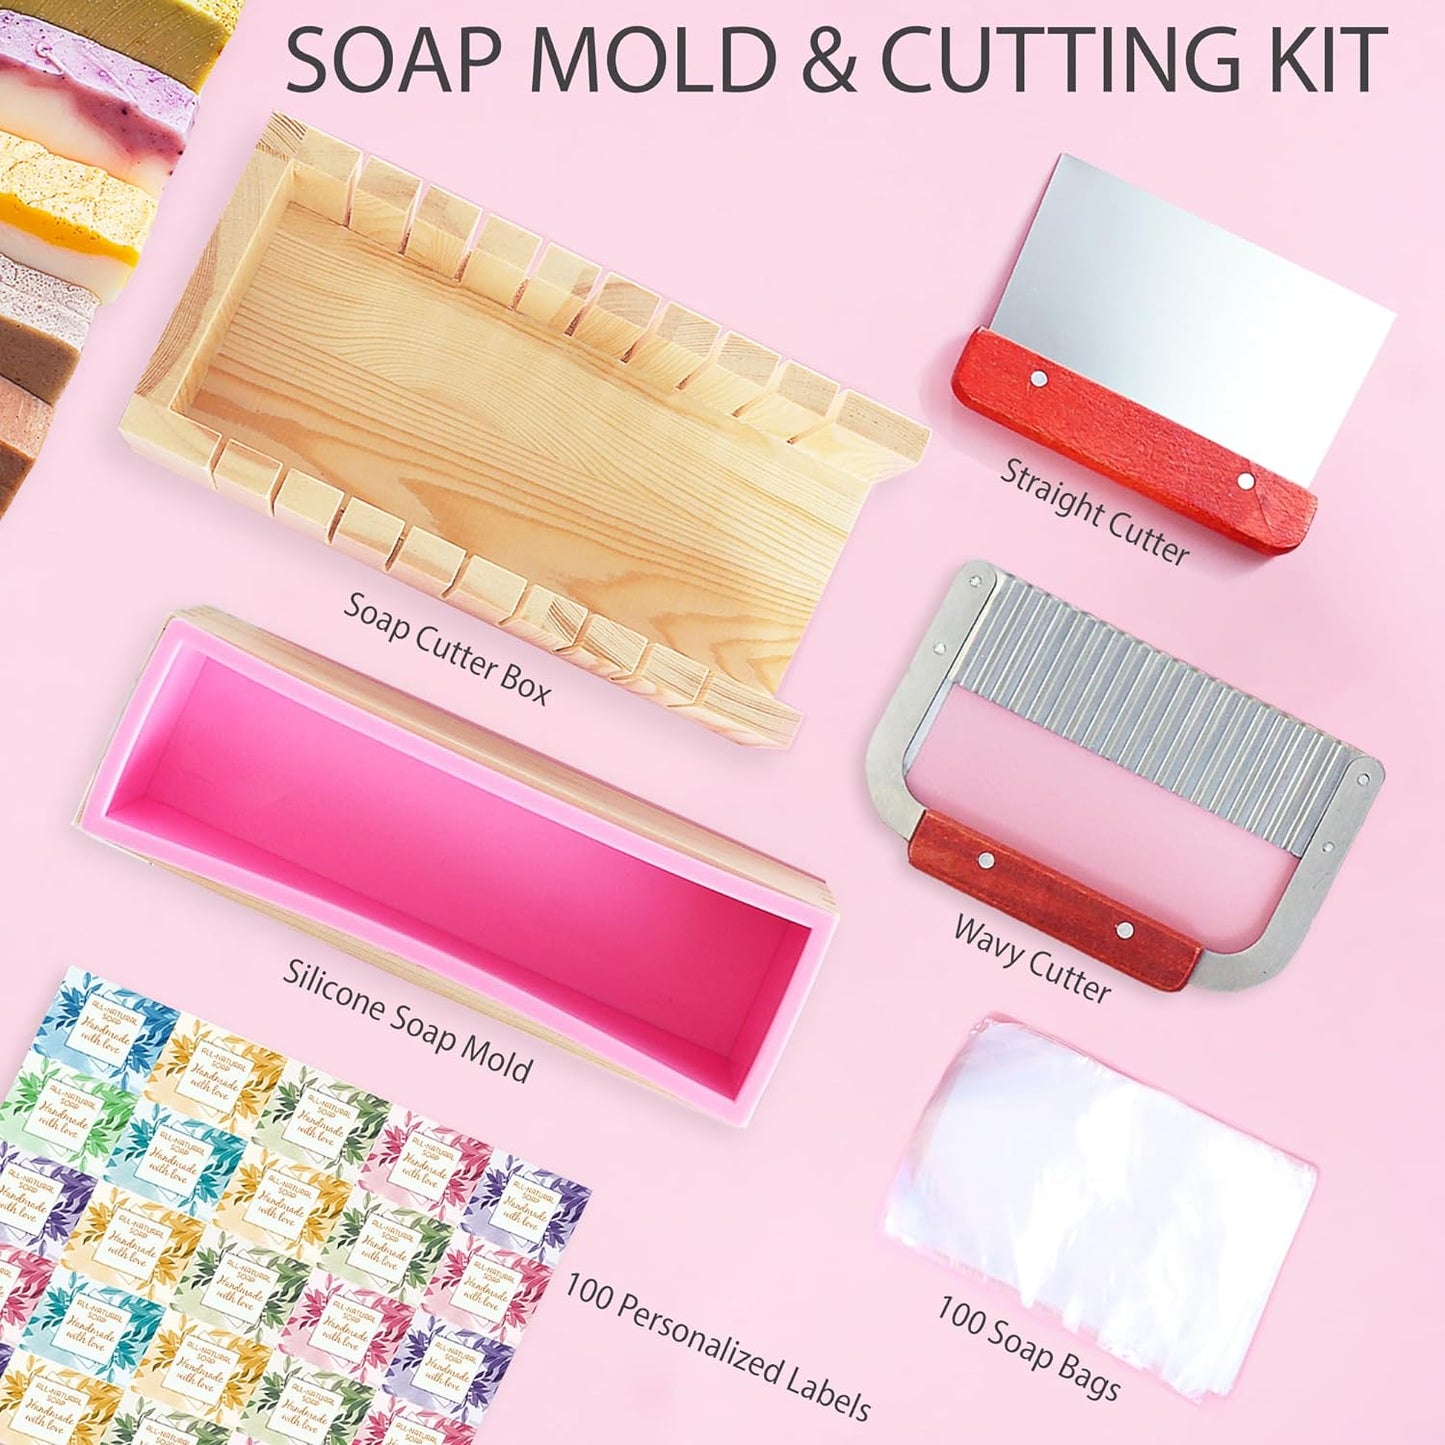 Soap Mold and Cutting Kit with Soap Cutter, Silicone Mold with Wooden Box, Wavy and Straight Scraper, Personalized Labels and Plastic Bags